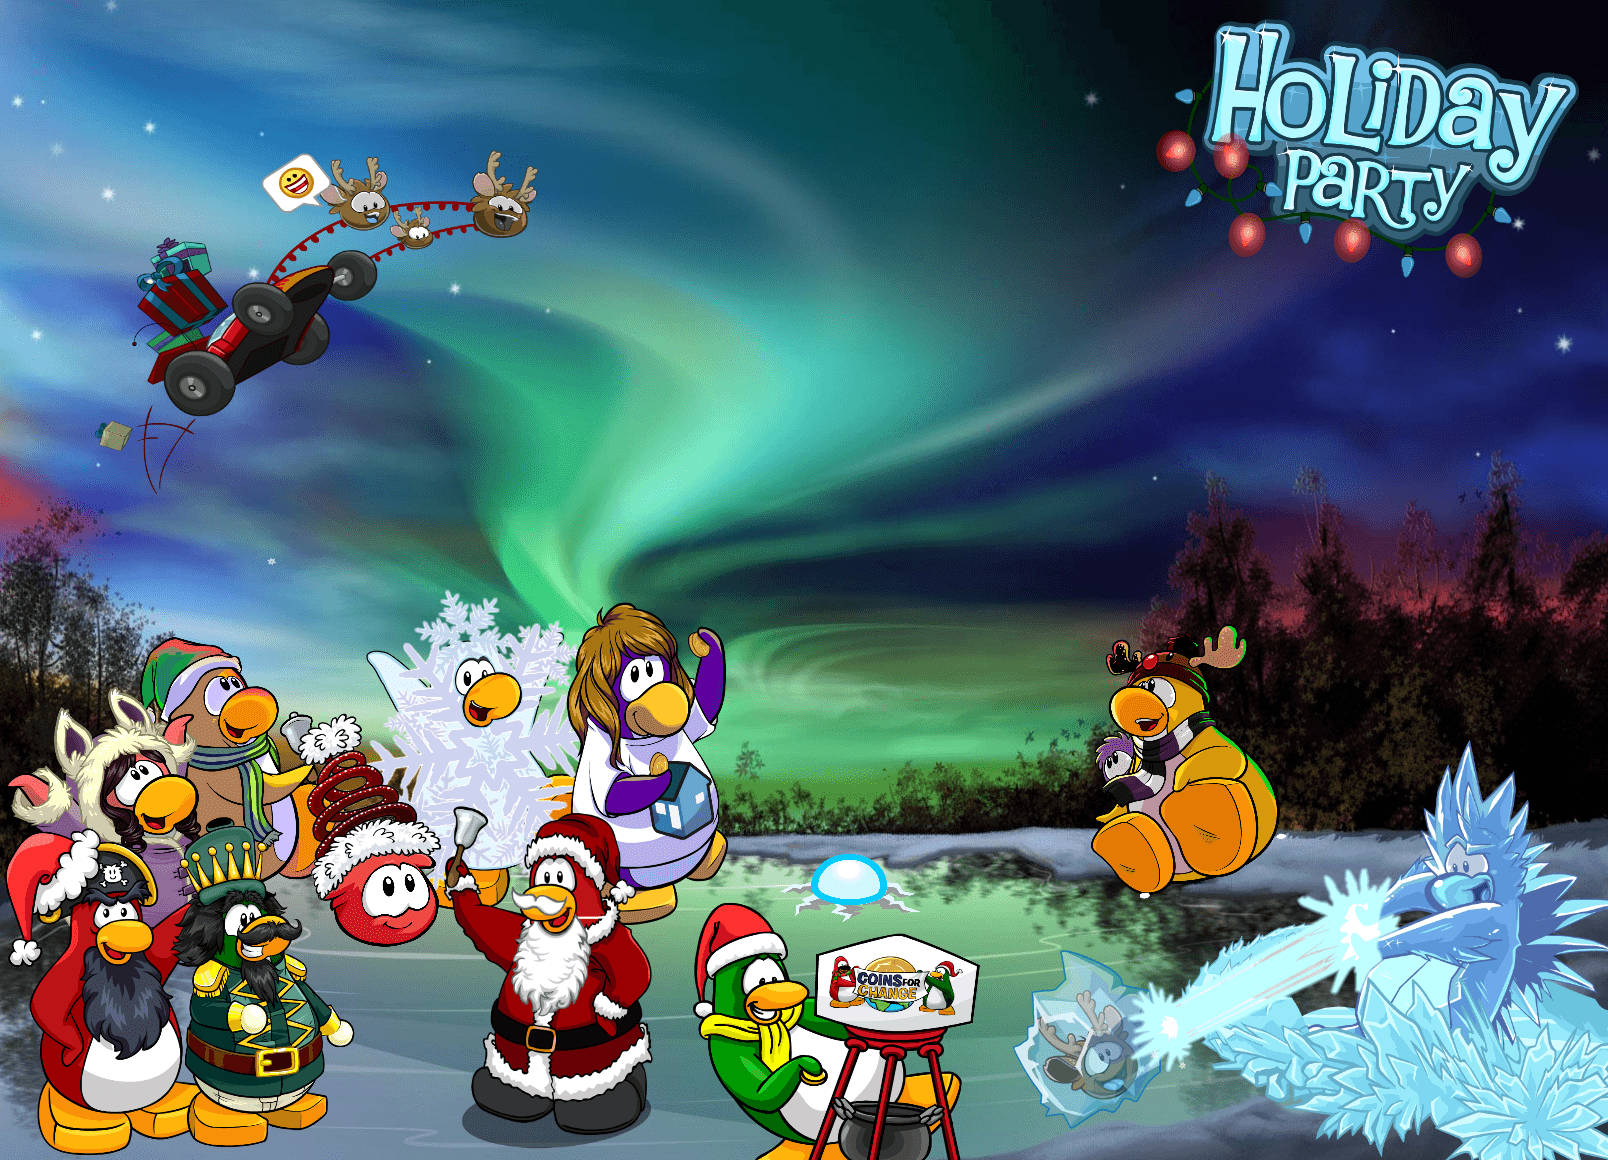 Club Penguin Christmas Party Flyer